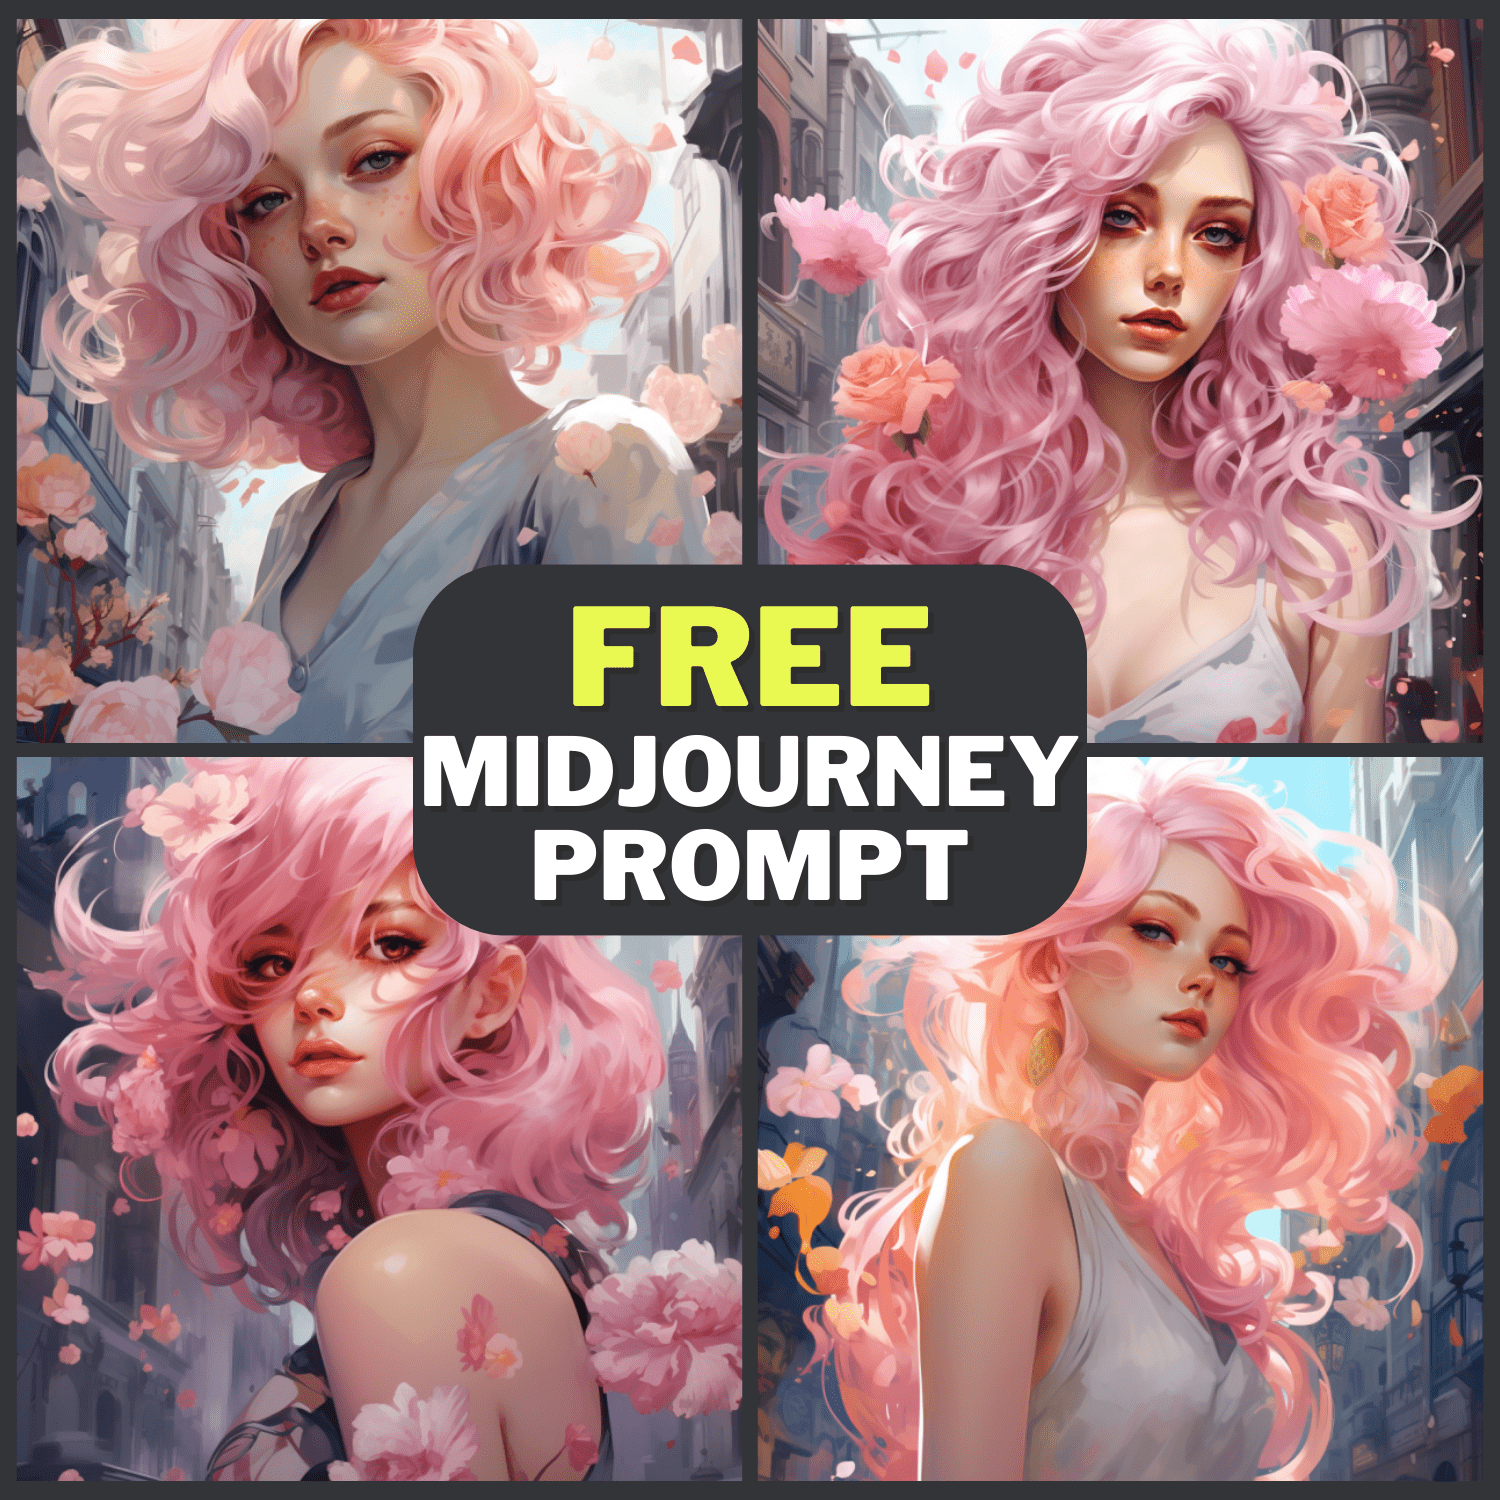 Stylized Girl With Pink Hair City Portrait Free Midjourney Prompt 1